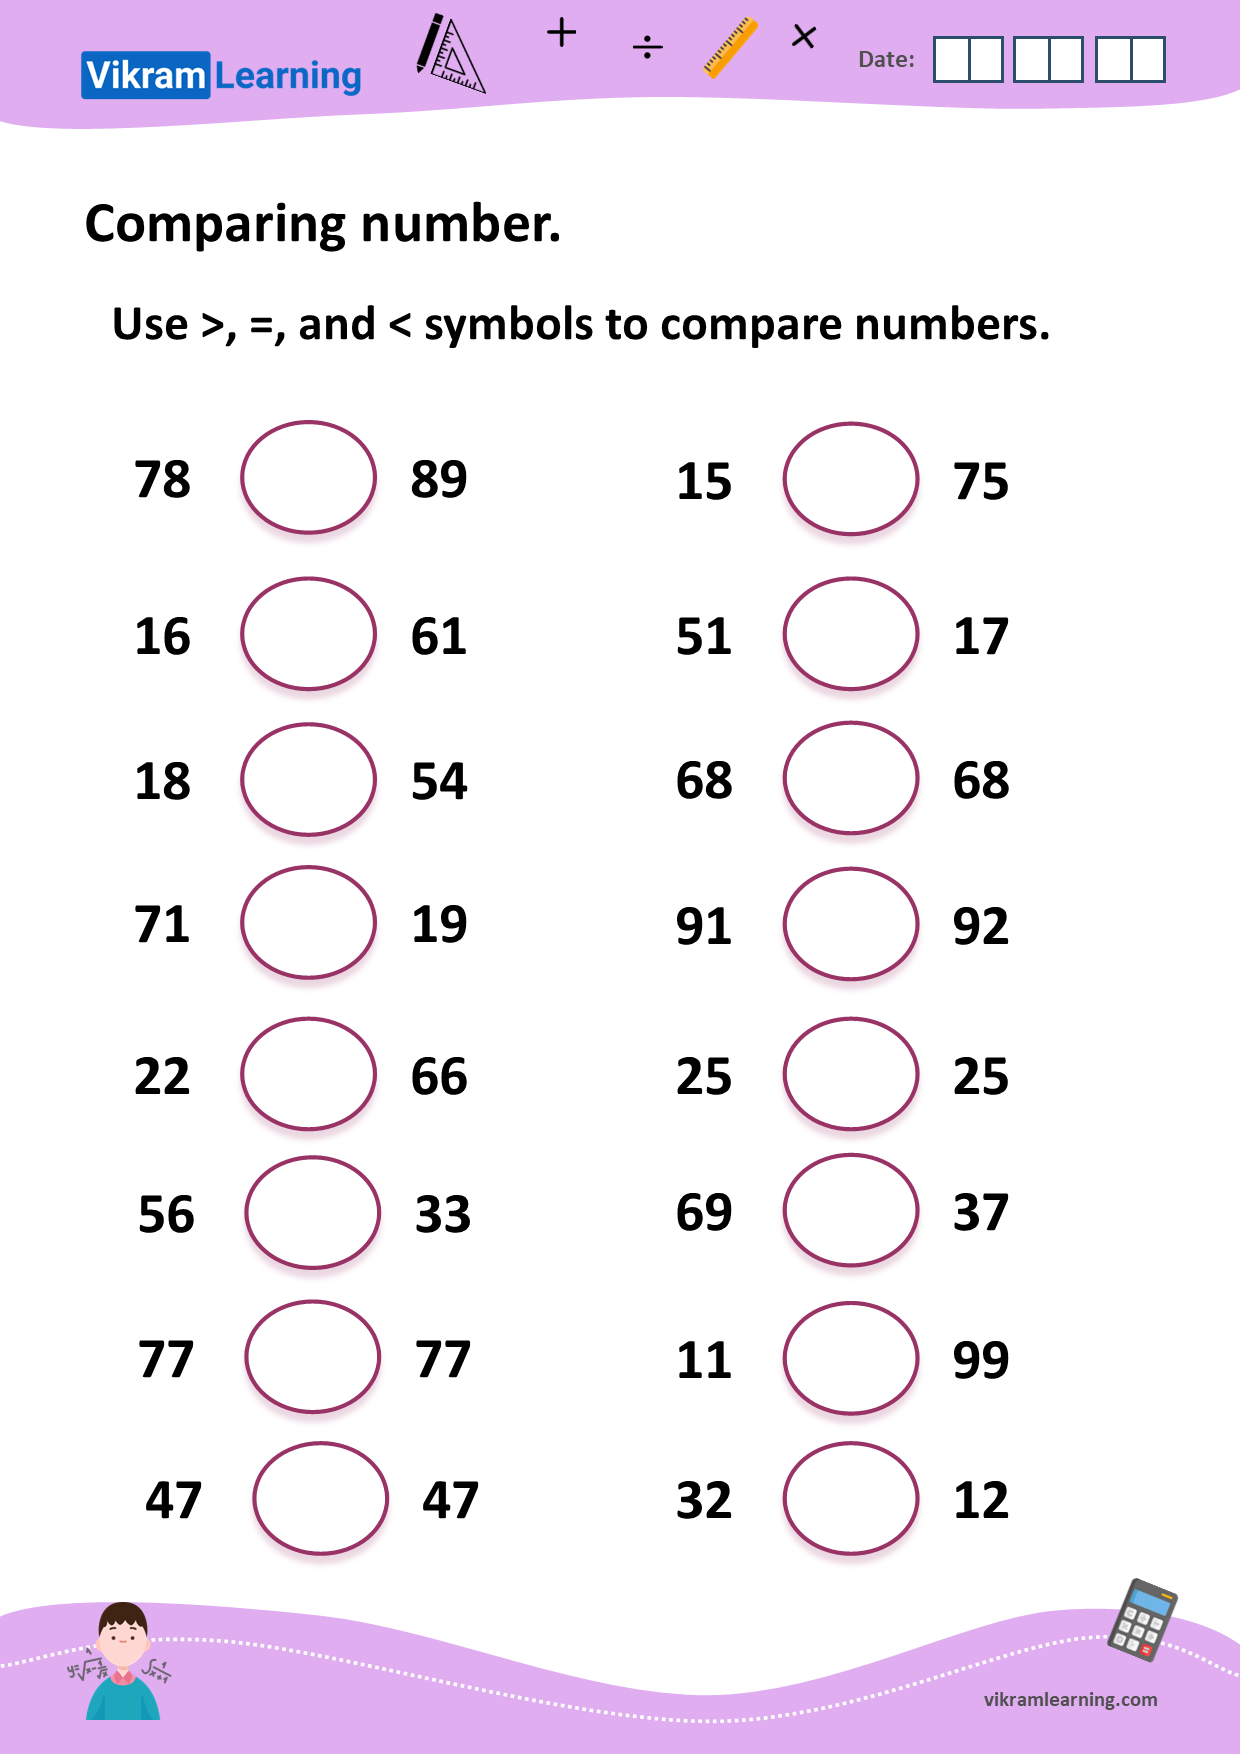 download-comparing-numbers-up-to-100-worksheets-vikramlearning